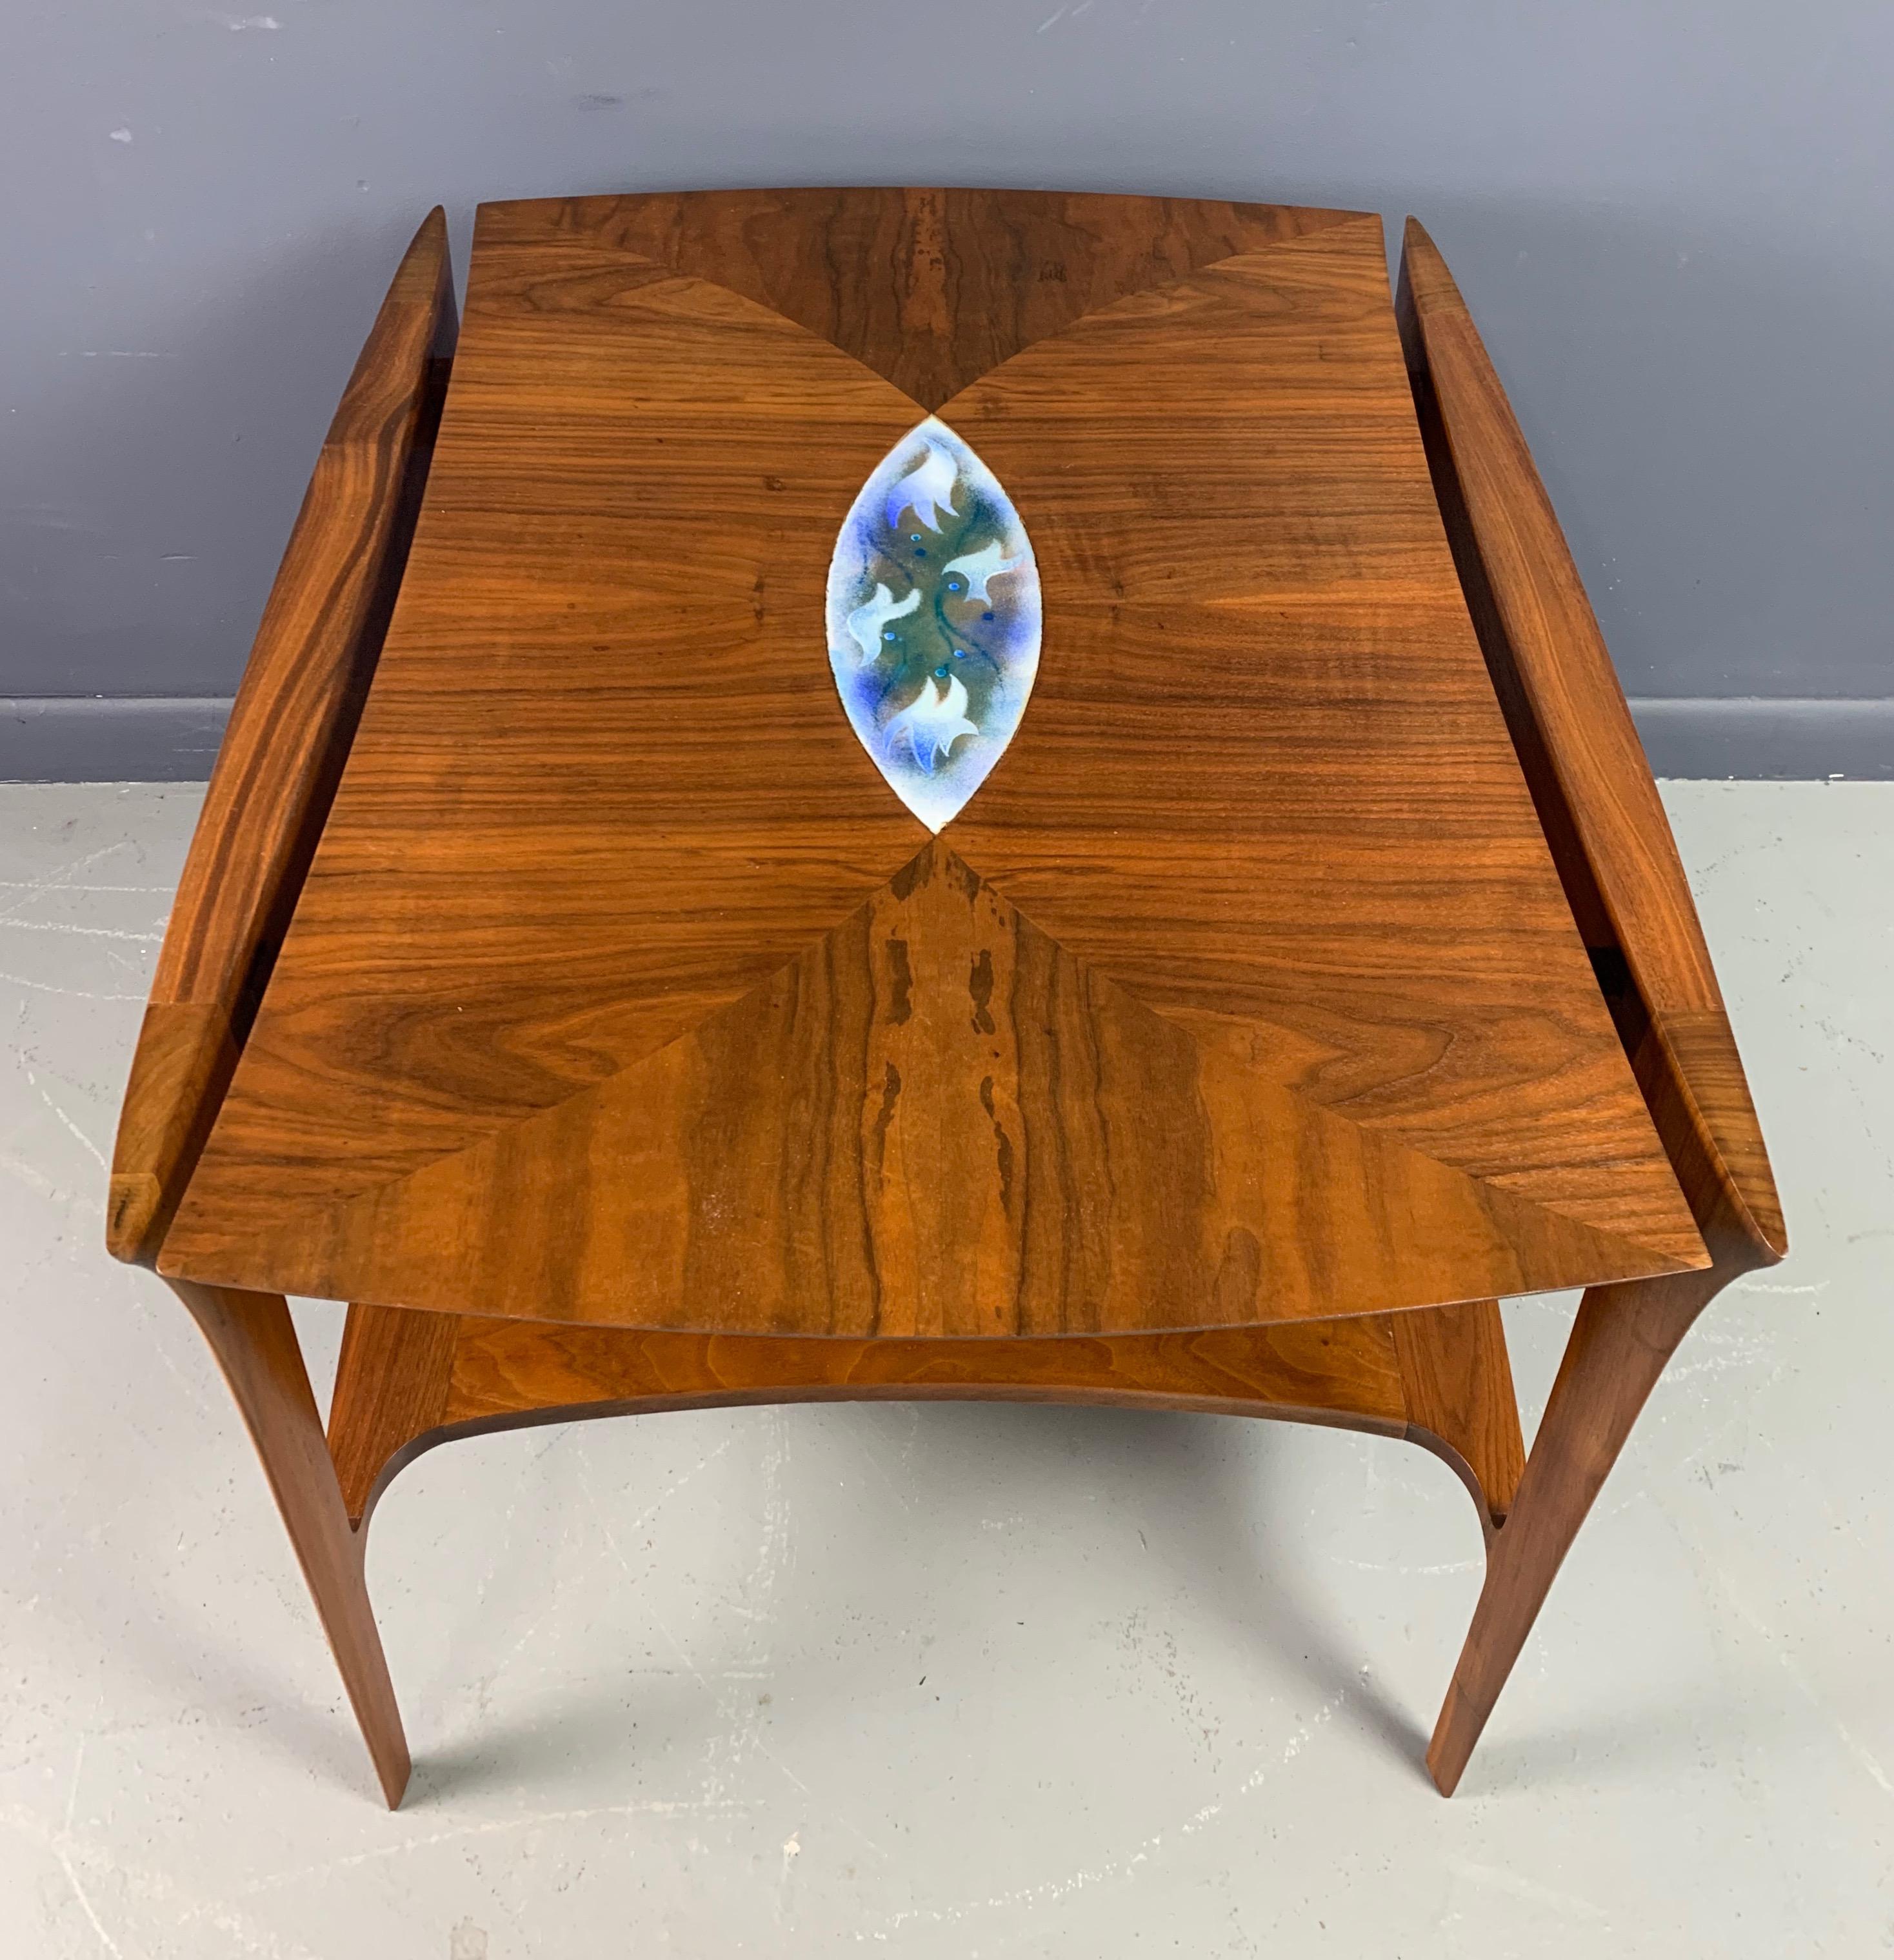 Danish Midcentury Walnut Sculpted Side Table with Enameled Insert of Birds For Sale 5